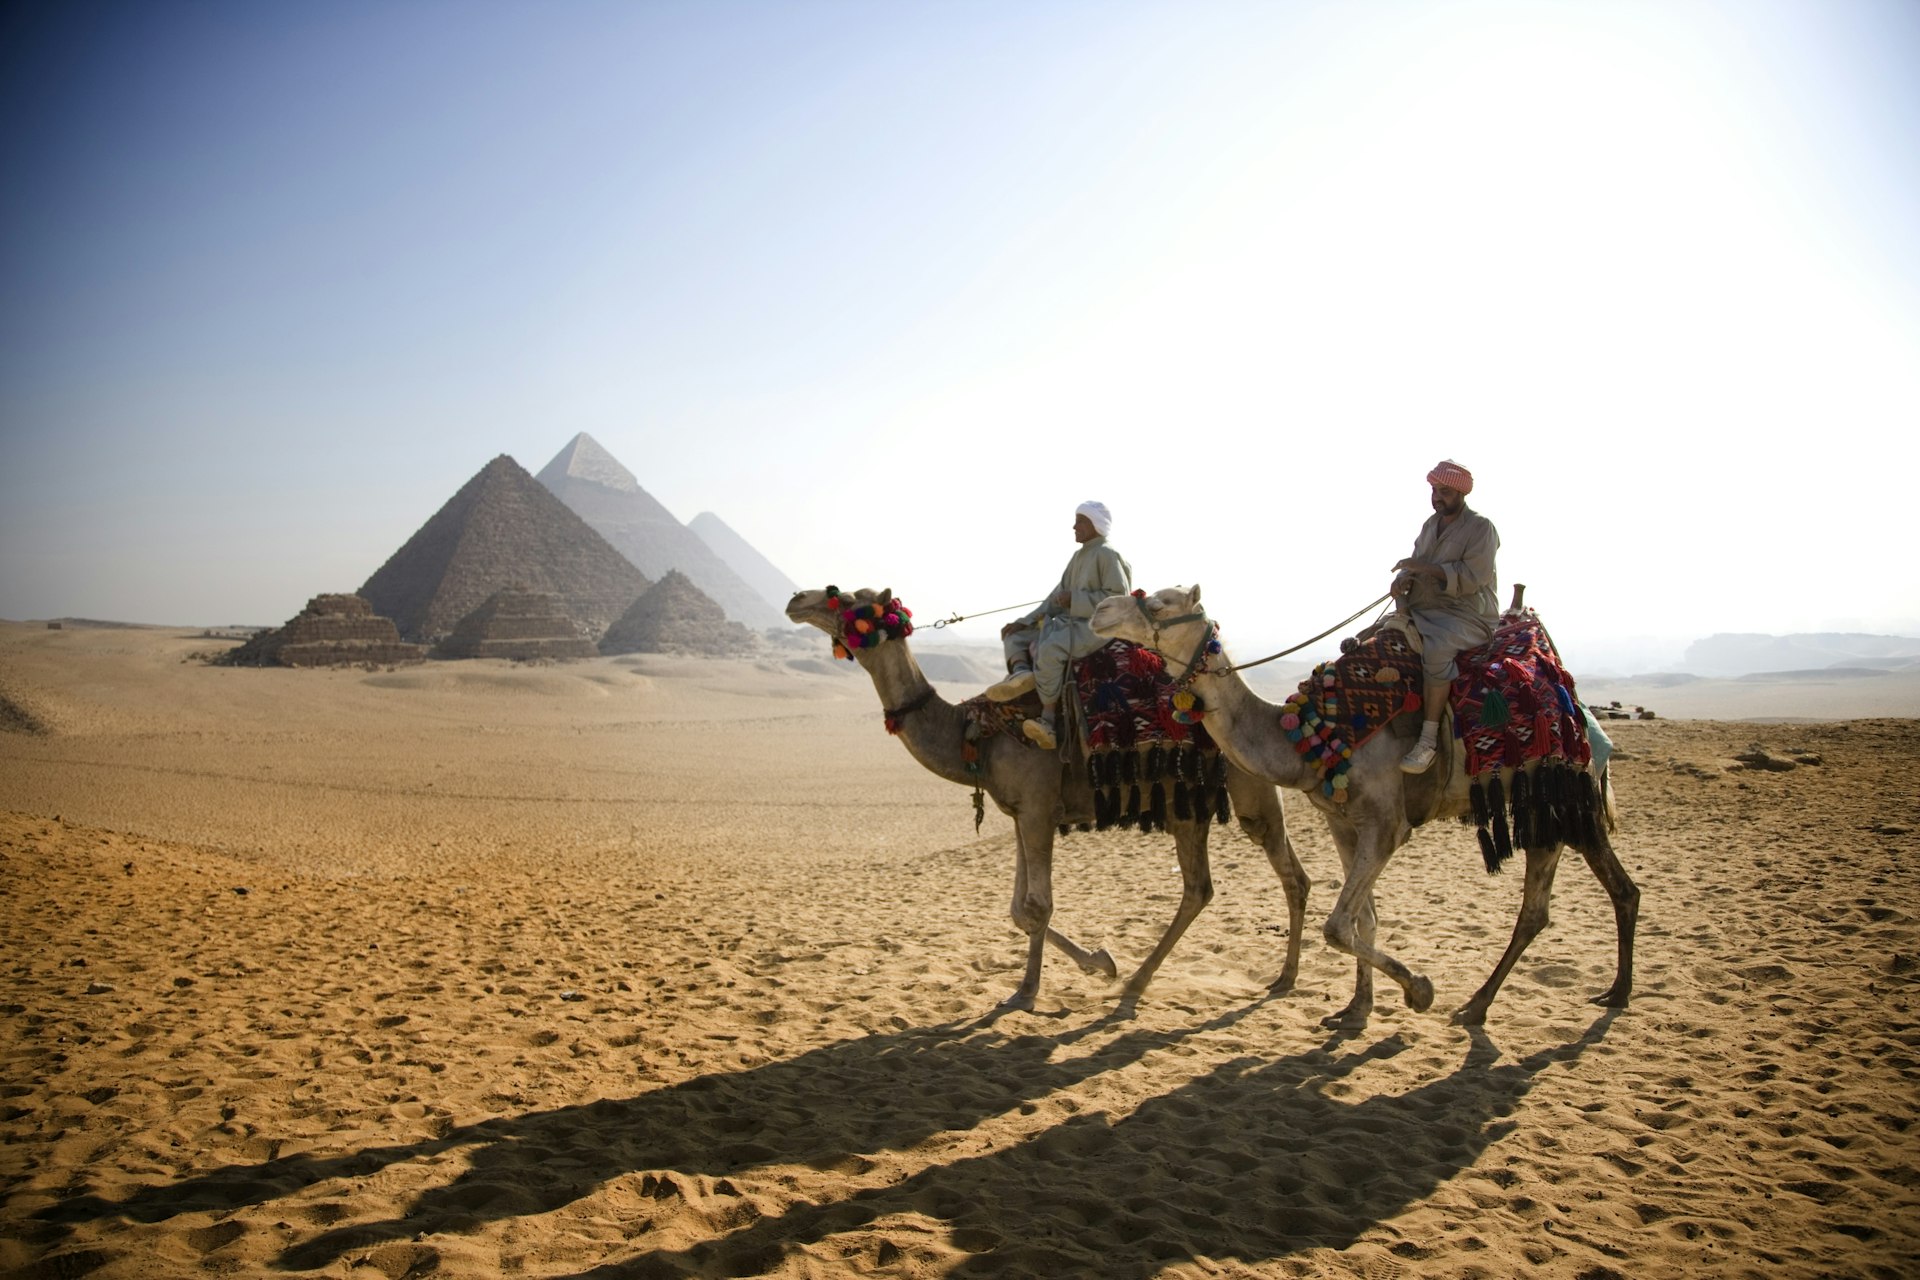 Two men ride camels in front of the Pyramids of Giza, Egypt